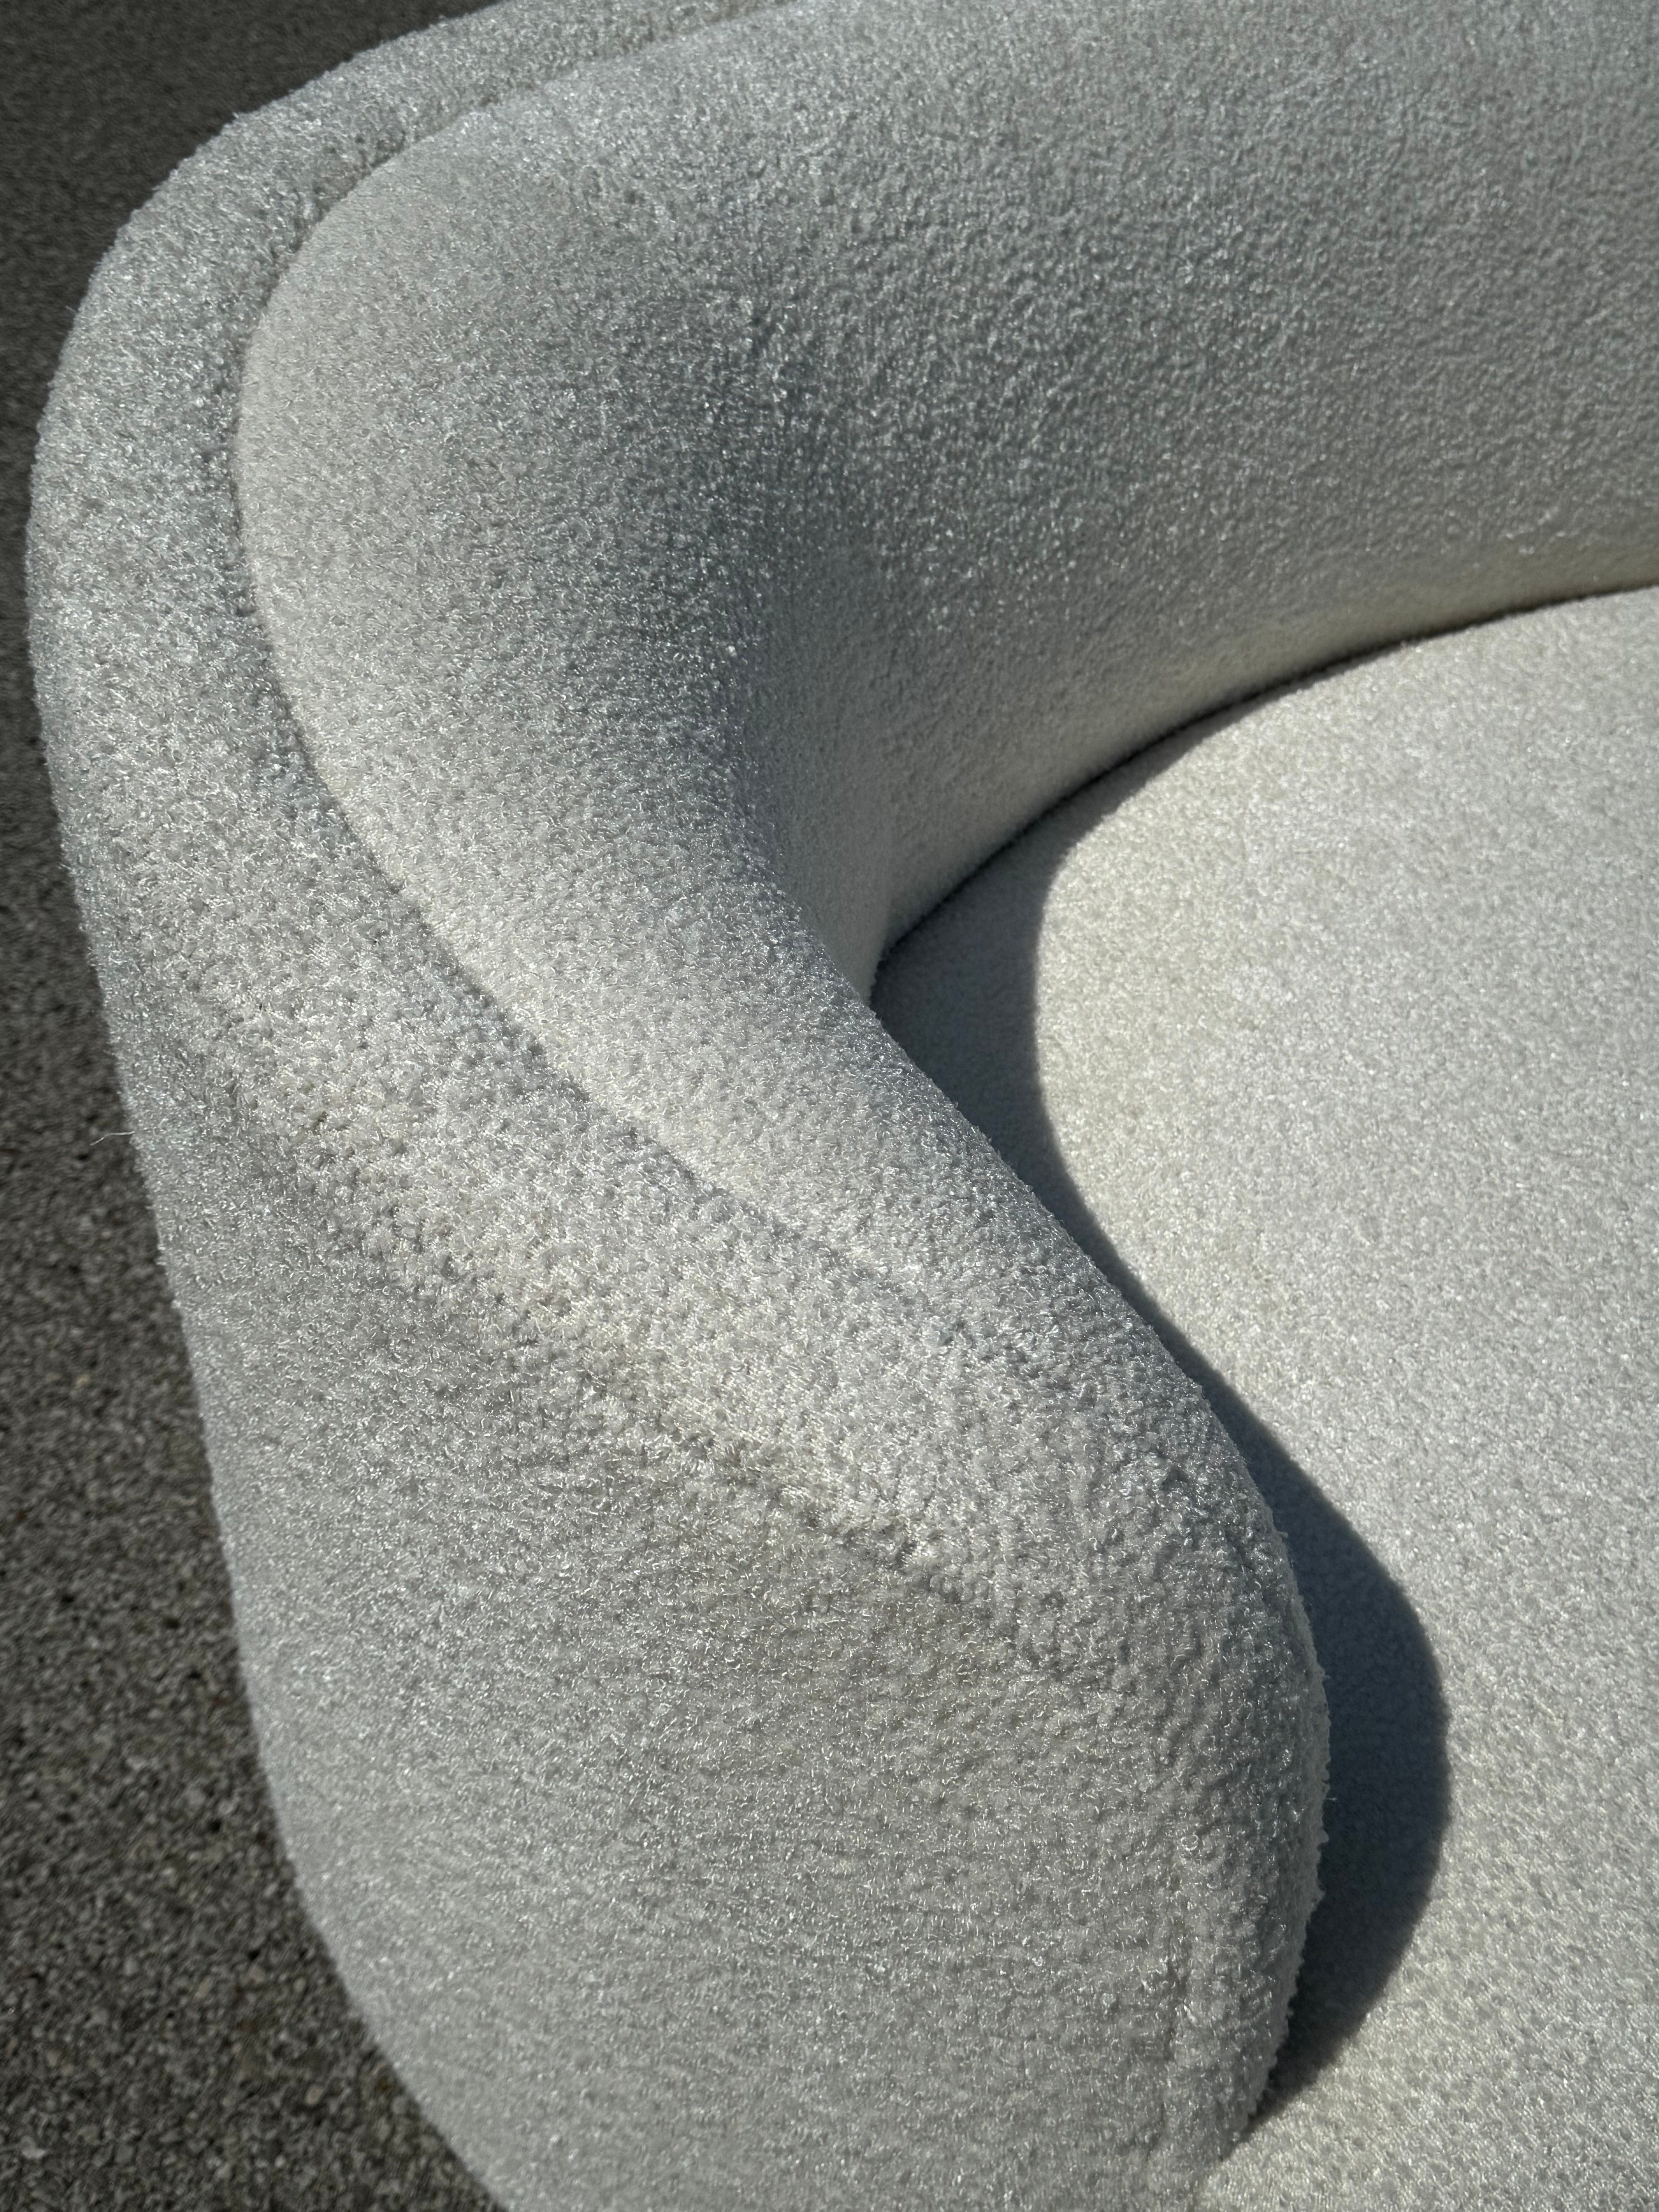 1980s Glamours Curved Sofa - Chaise by Vladimir Kagan for Weiman in White Bouclé For Sale 9